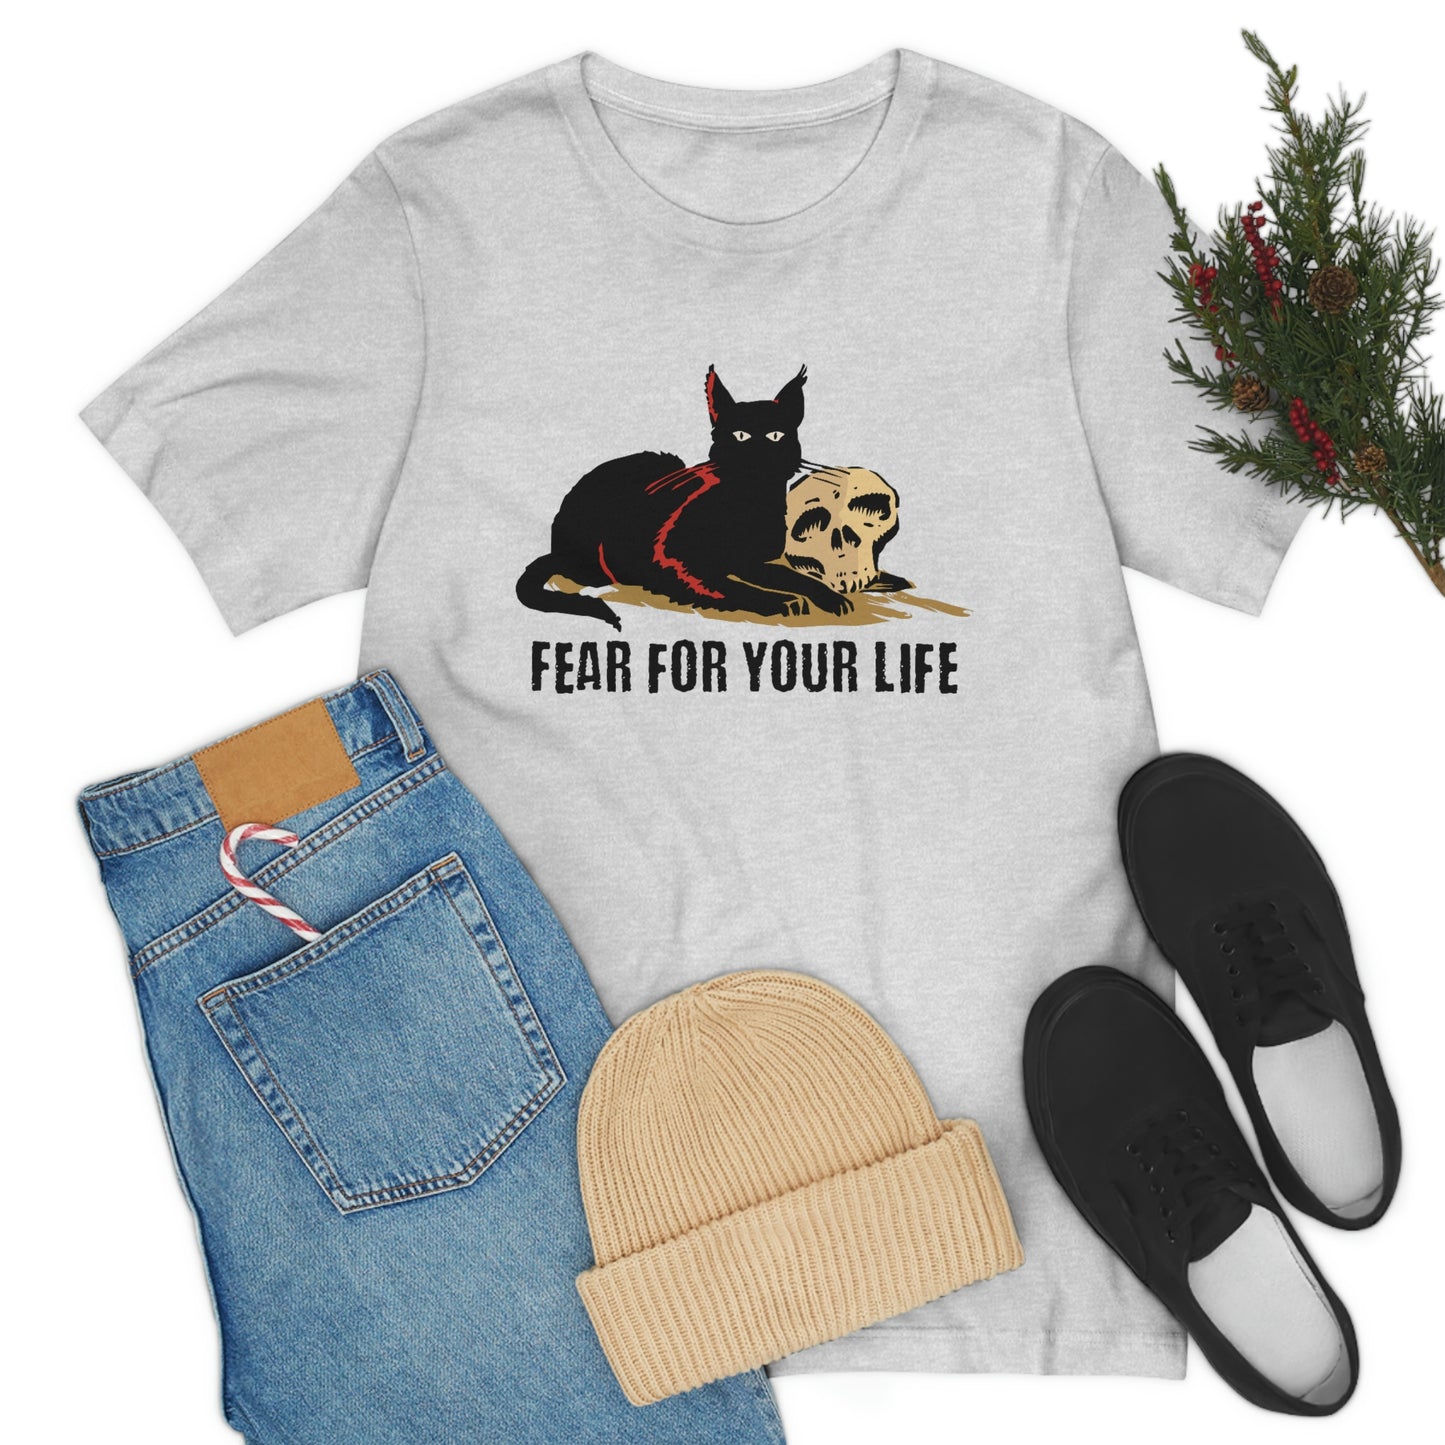 Black cat says fear for your life T-shirt